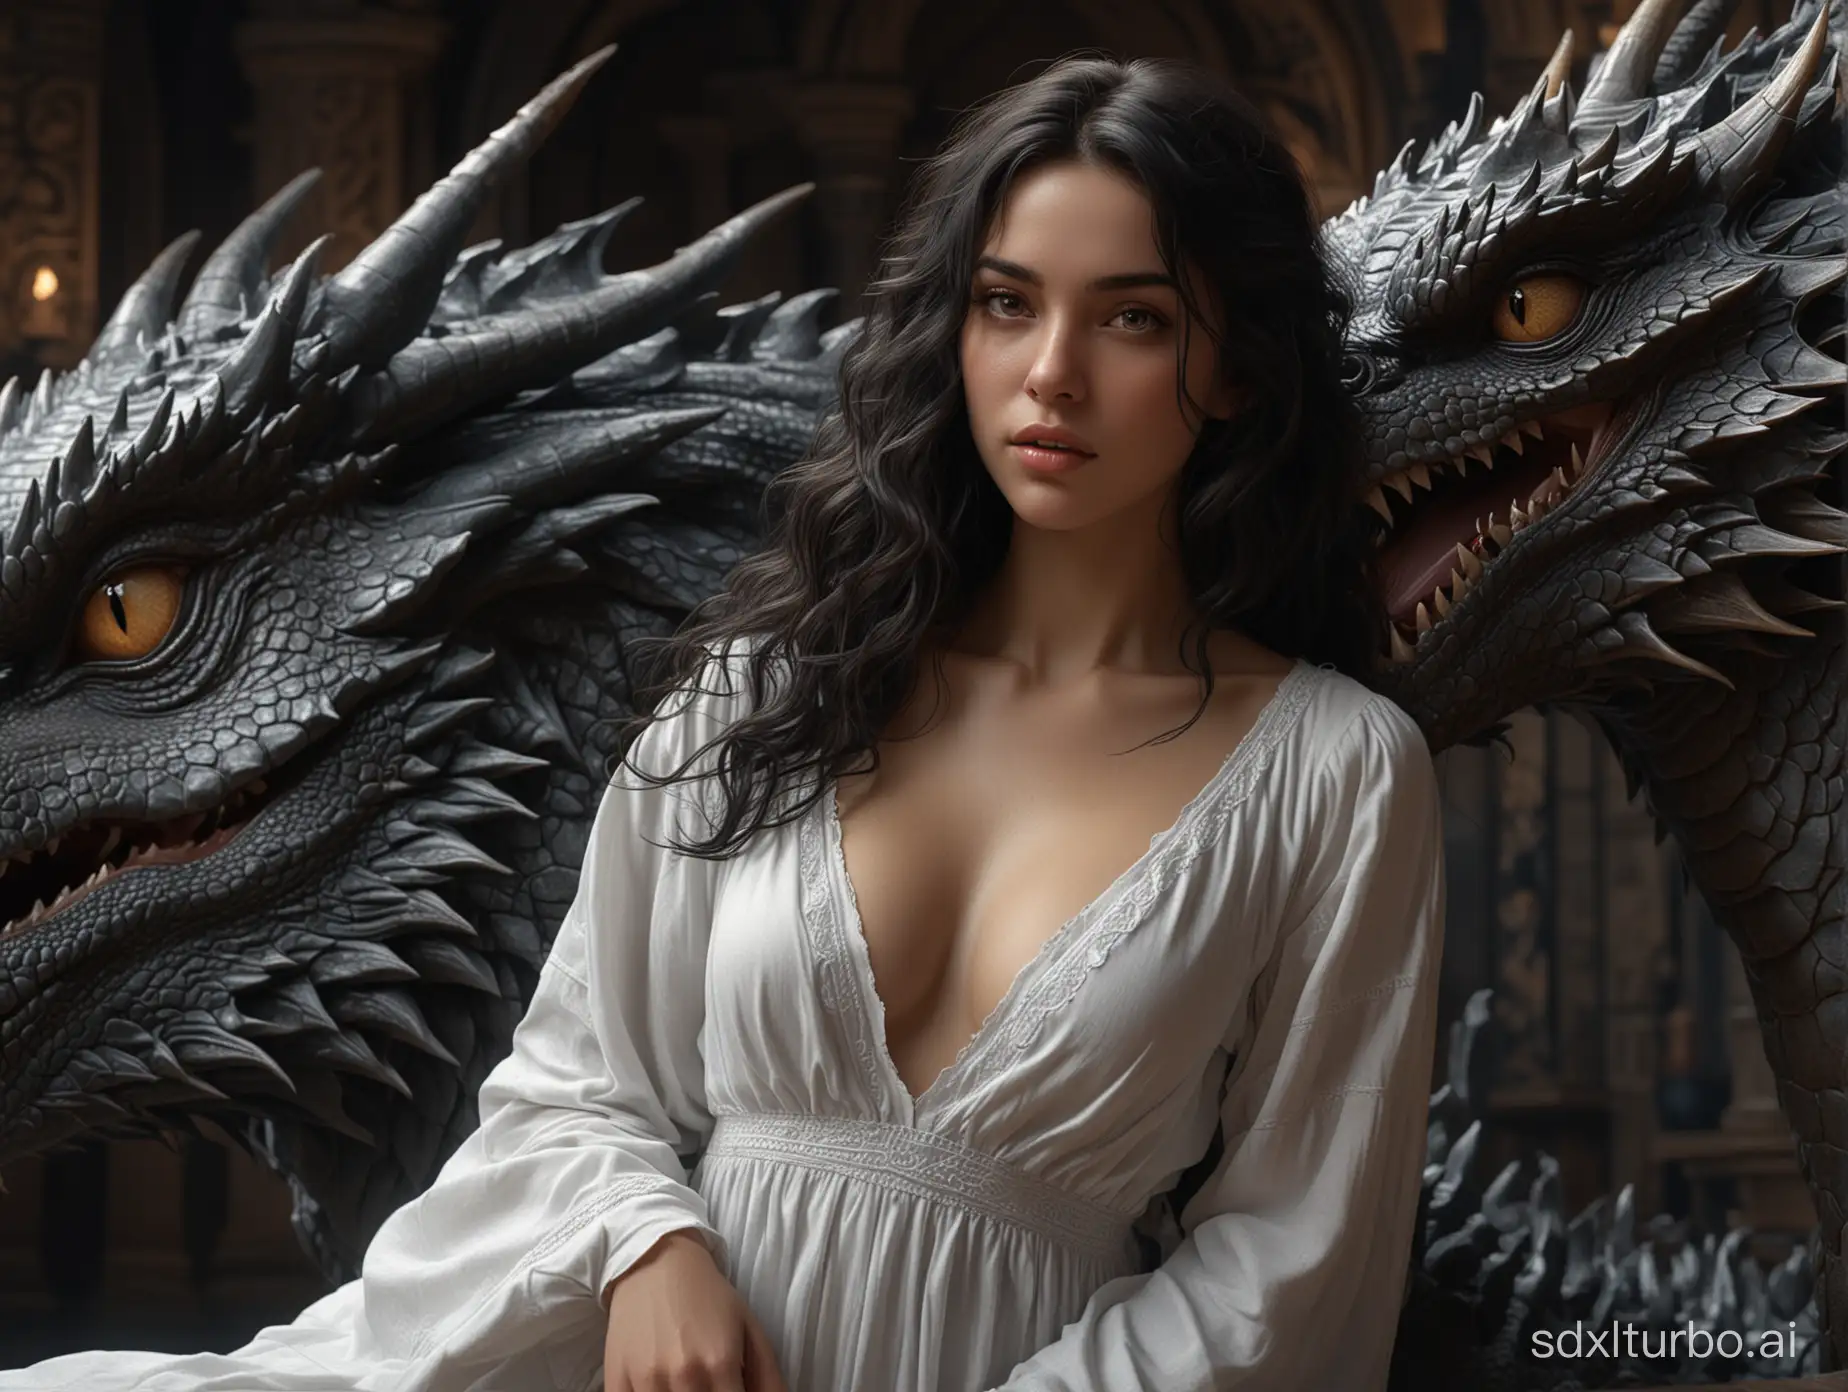 Enchanting-Encounter-NightgownClad-Woman-Gazes-into-the-Eyes-of-a-Majestic-Dragon